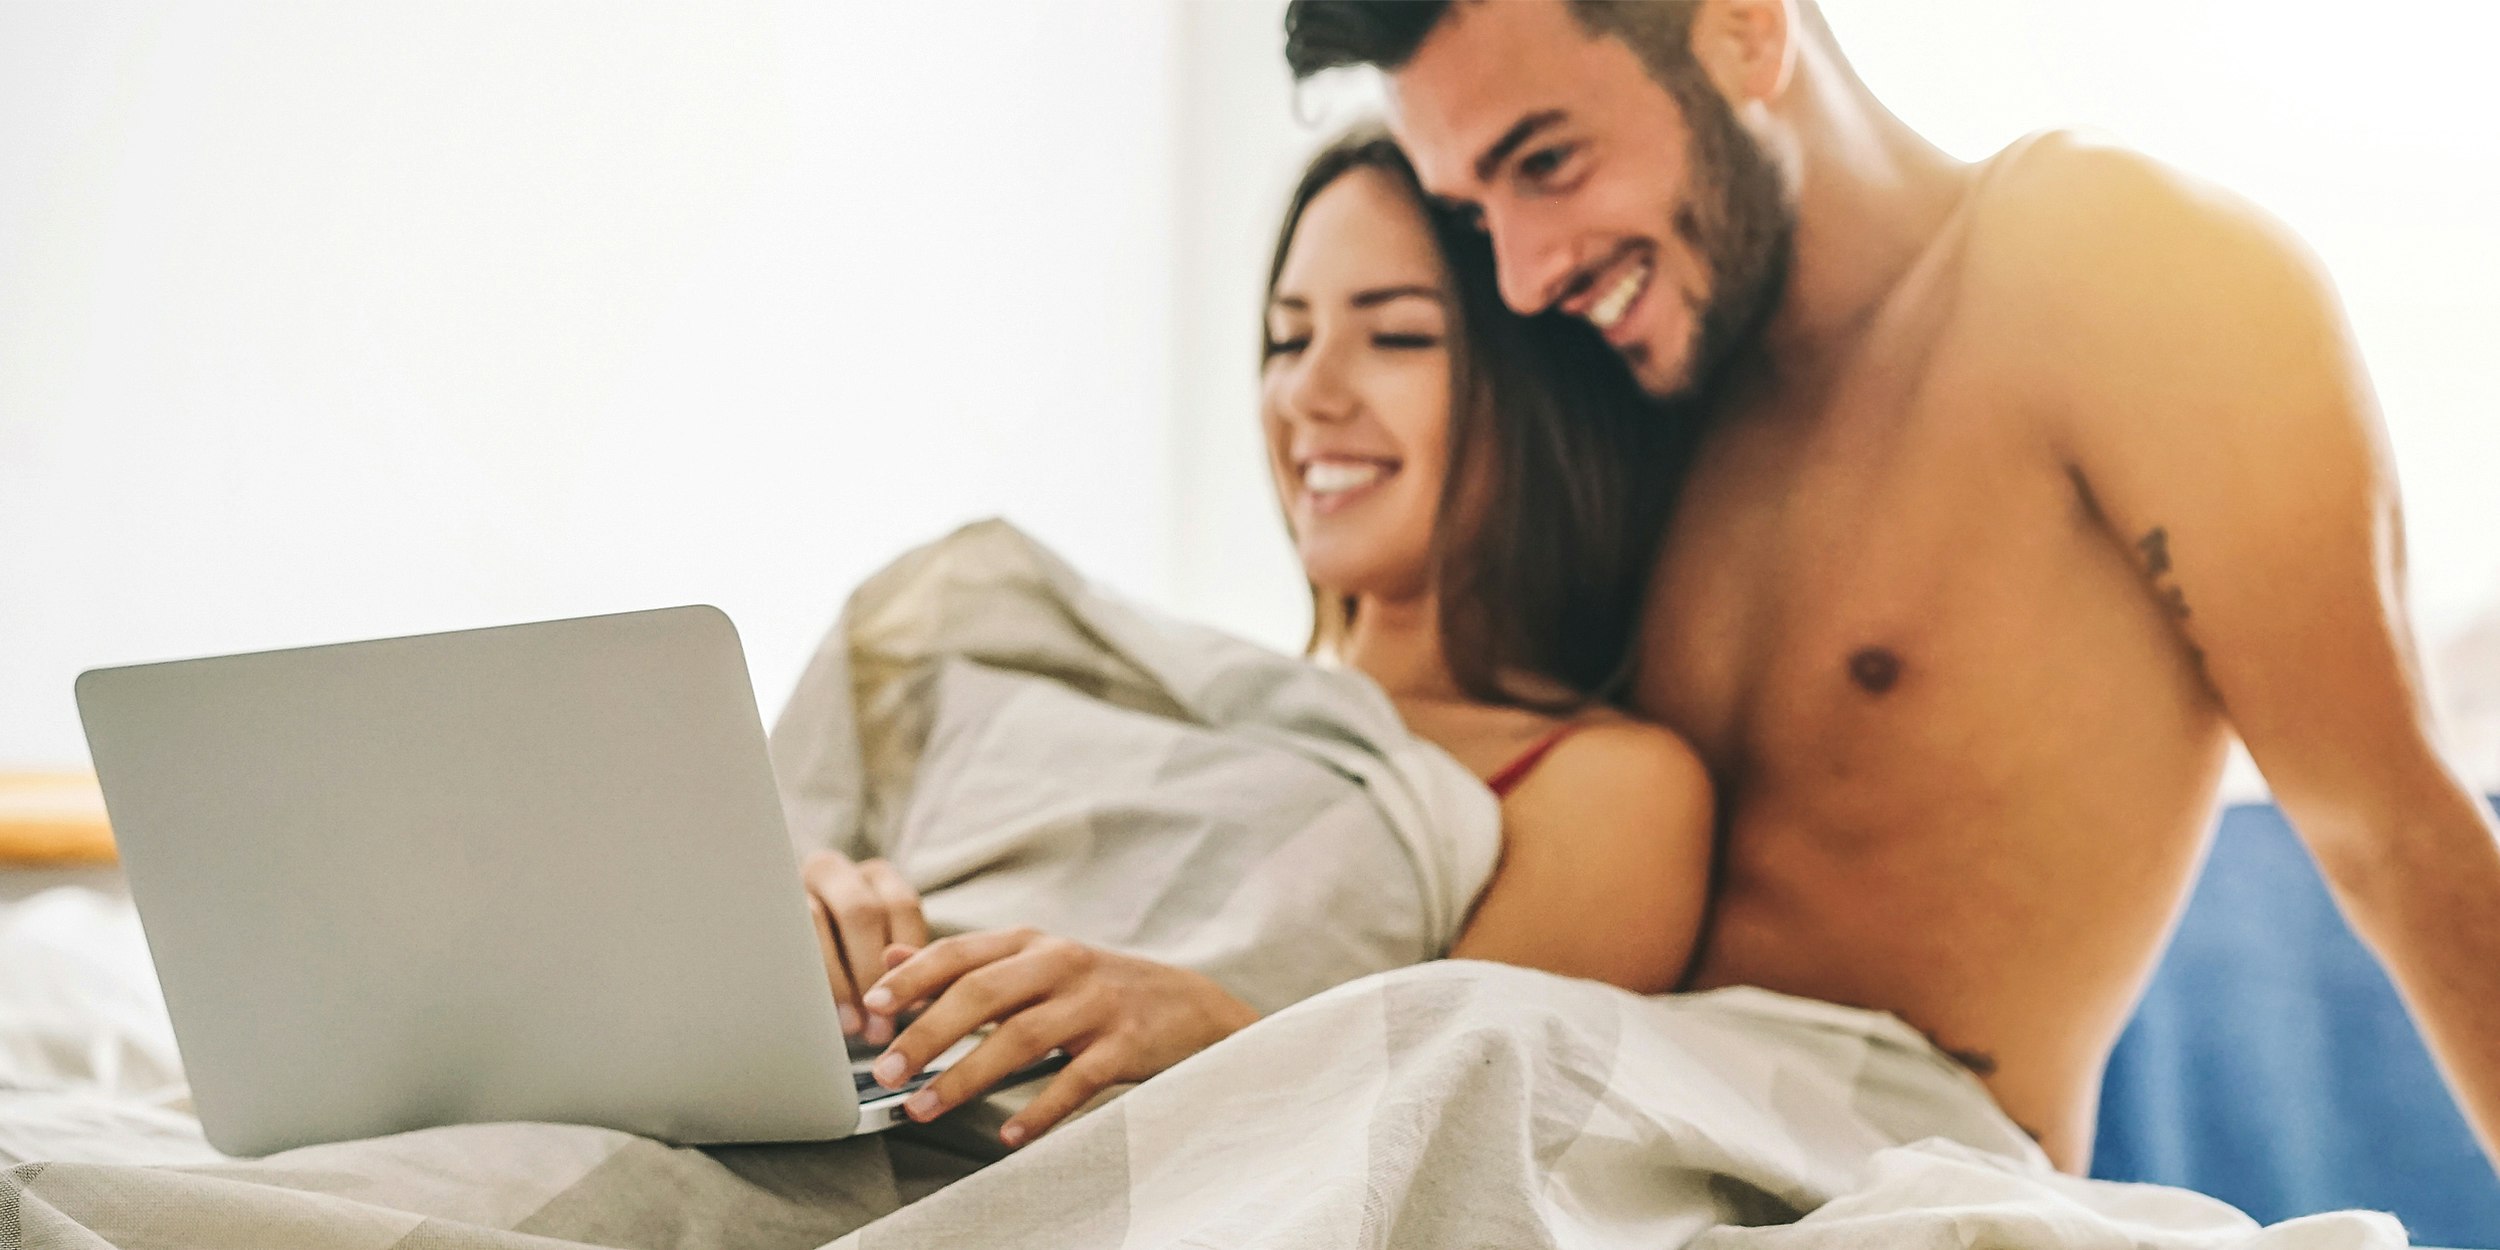 Best Porn Movies For Couples